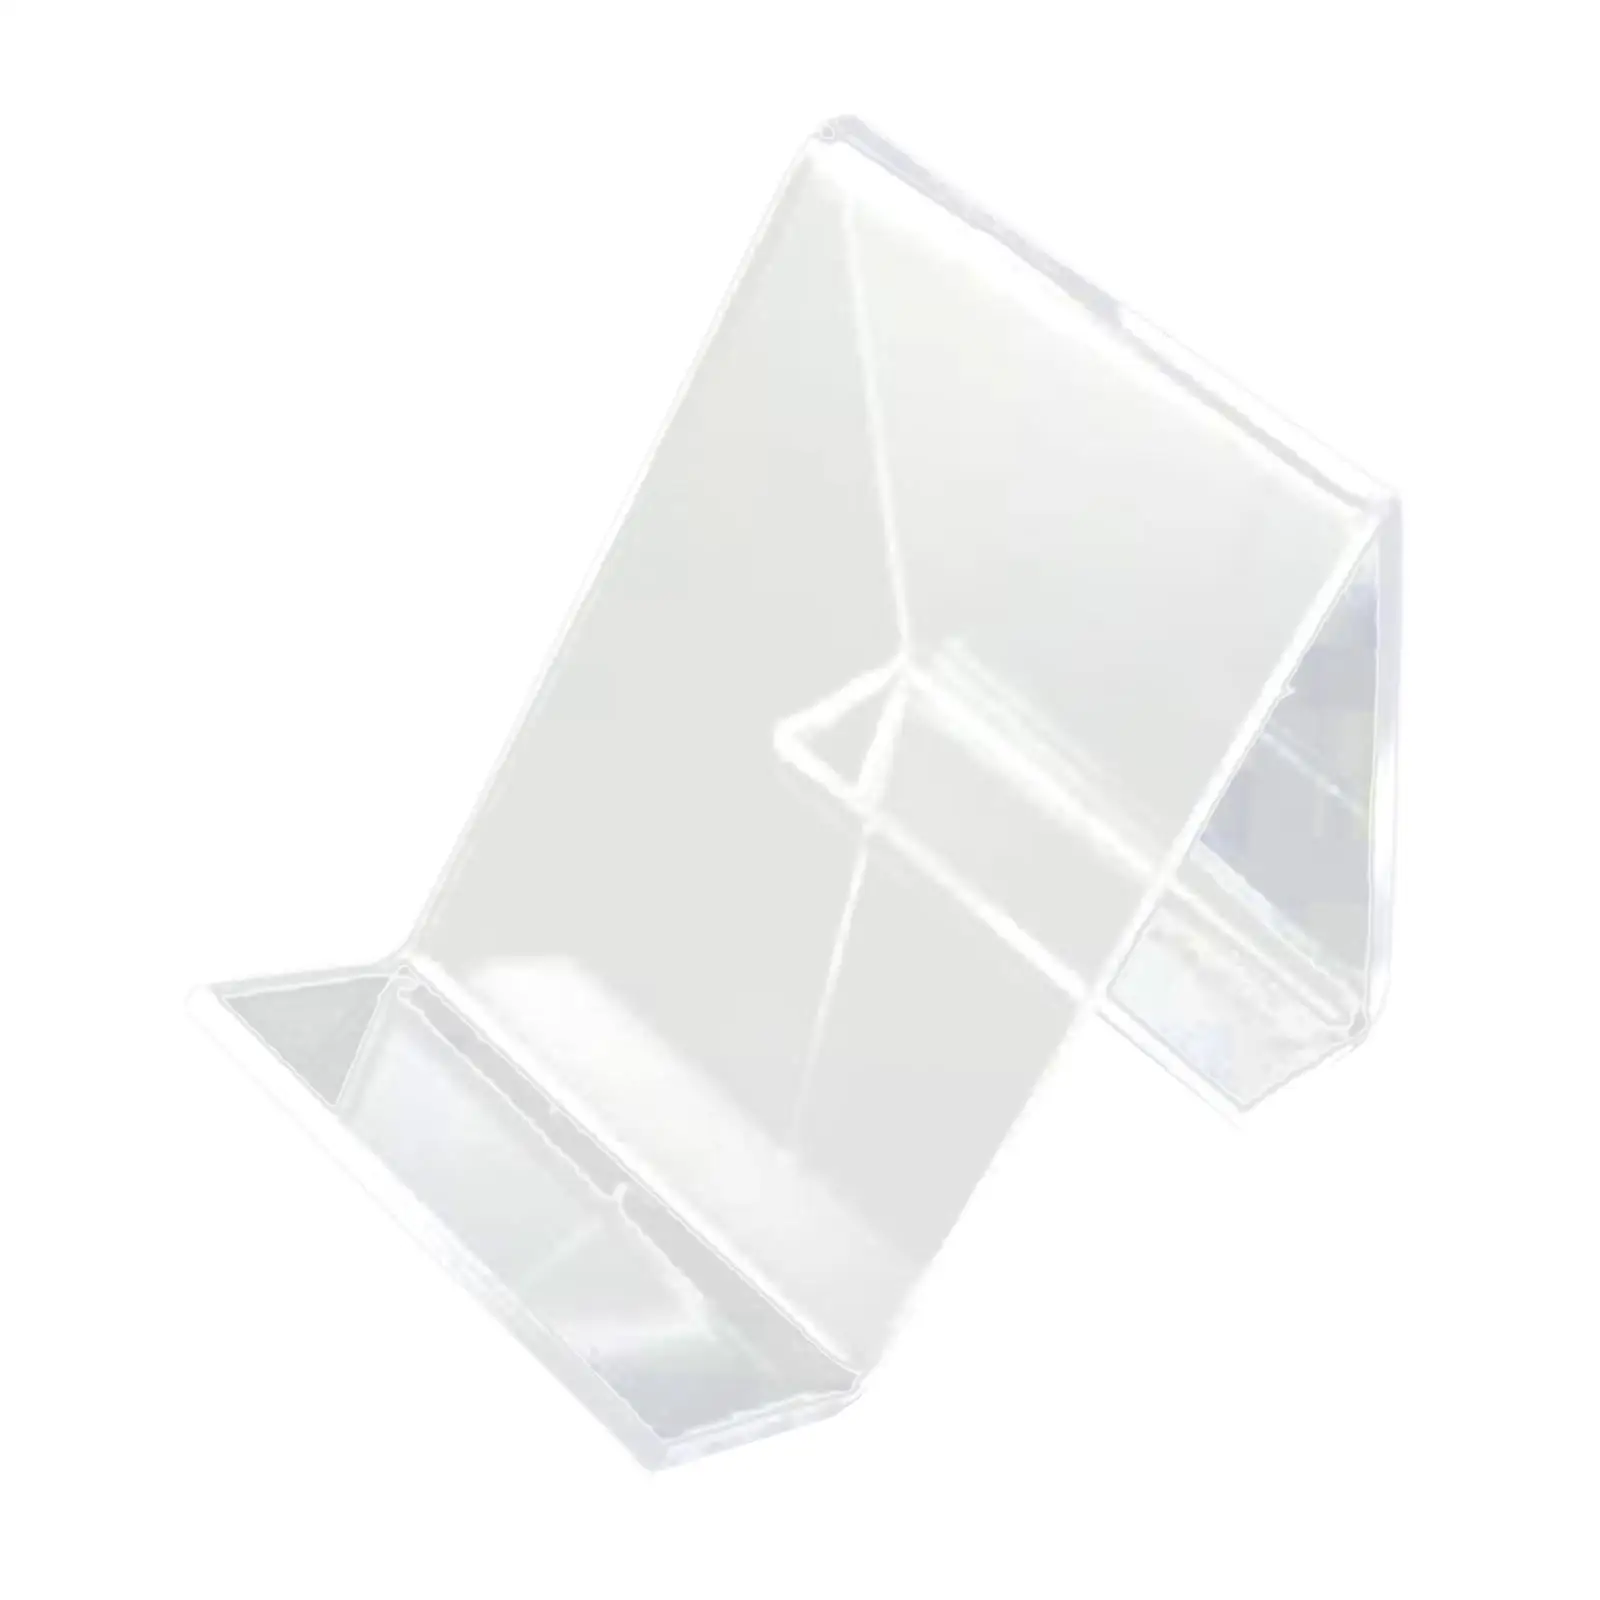 Desktop Mobile Phone Acrylic Stand Clear Holder Easy to Use Daily Use Displaying Collections